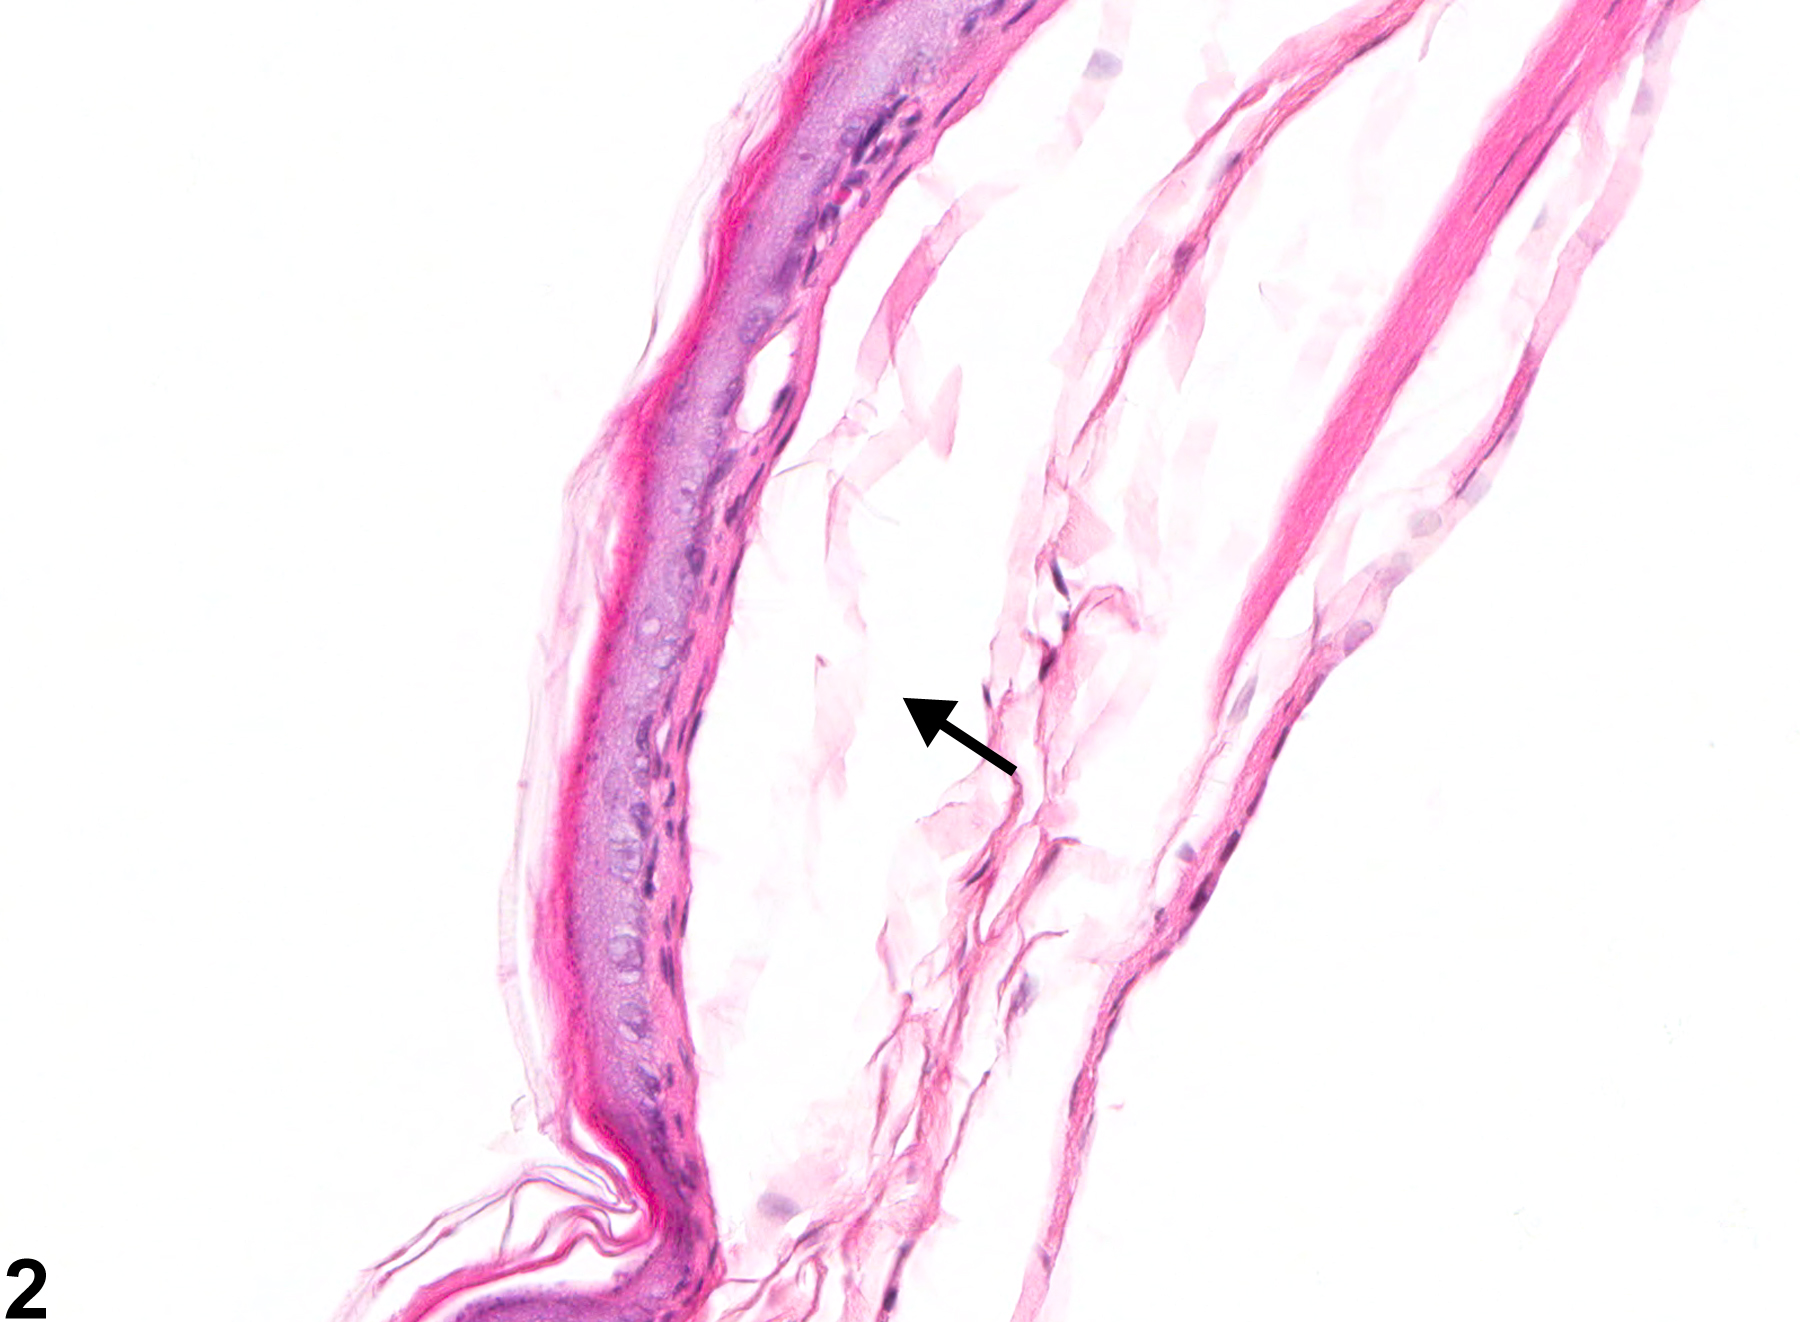 Image of edema in the forestomach from a male F344/N rat in a chronic study